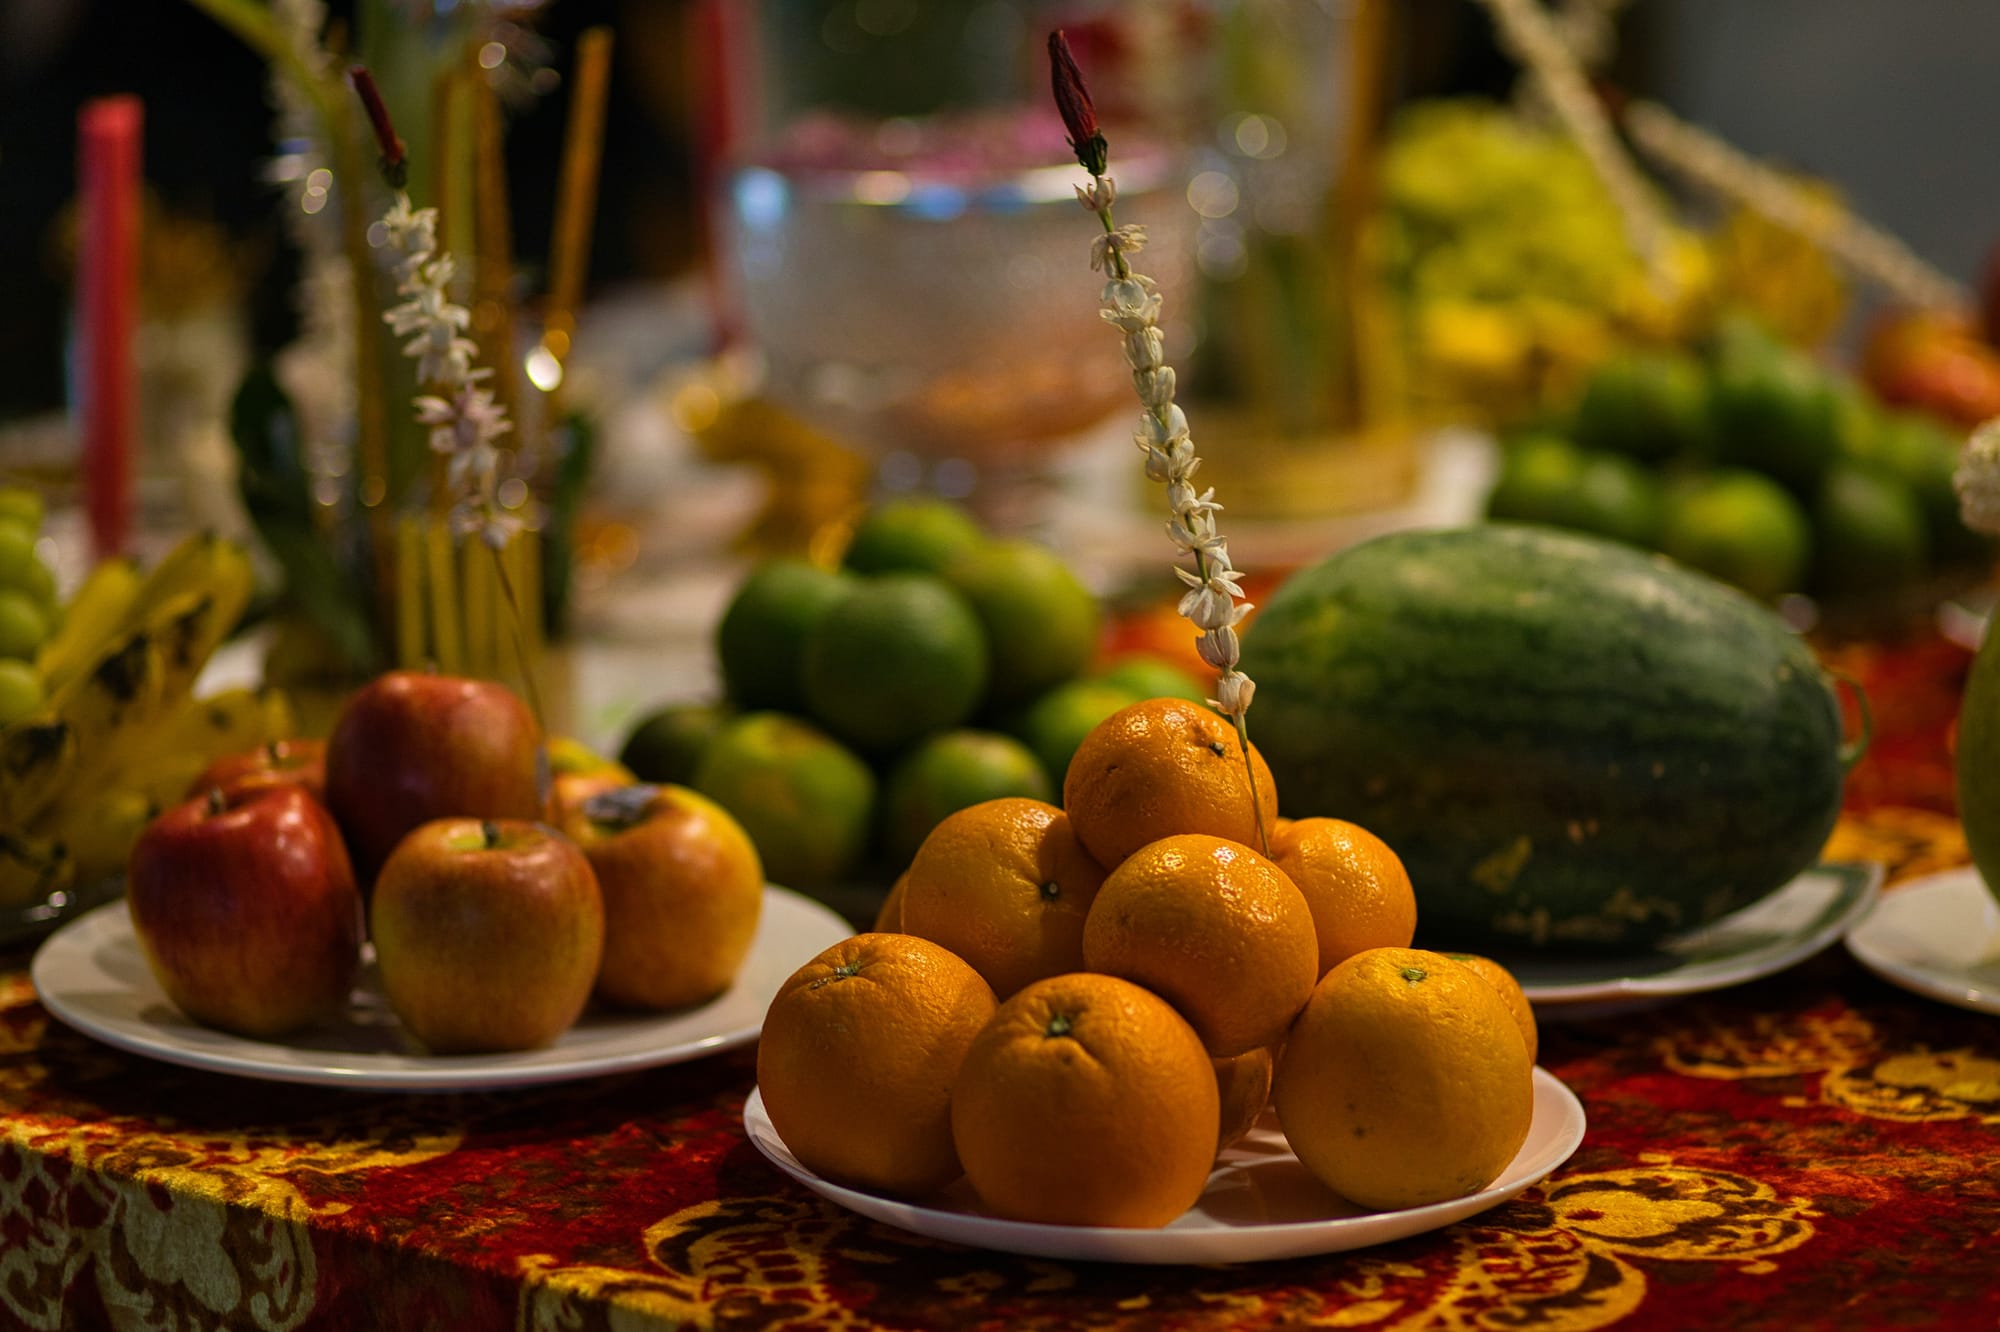 Traditional Khmer New Year offerings